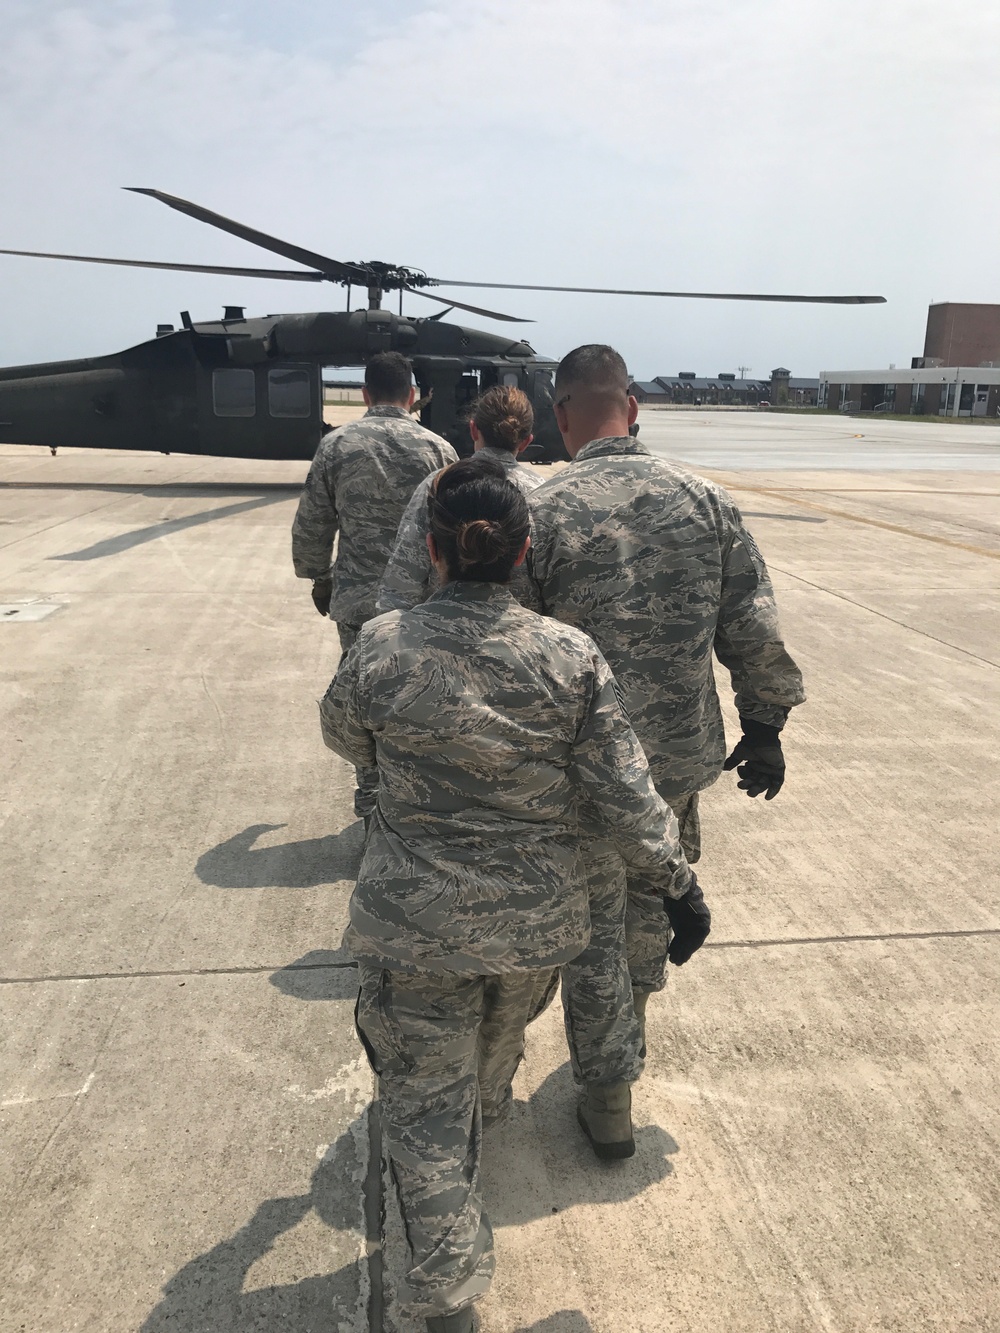 102nd Medical Group Detachment 1 trains at Joint Base Cape Cod